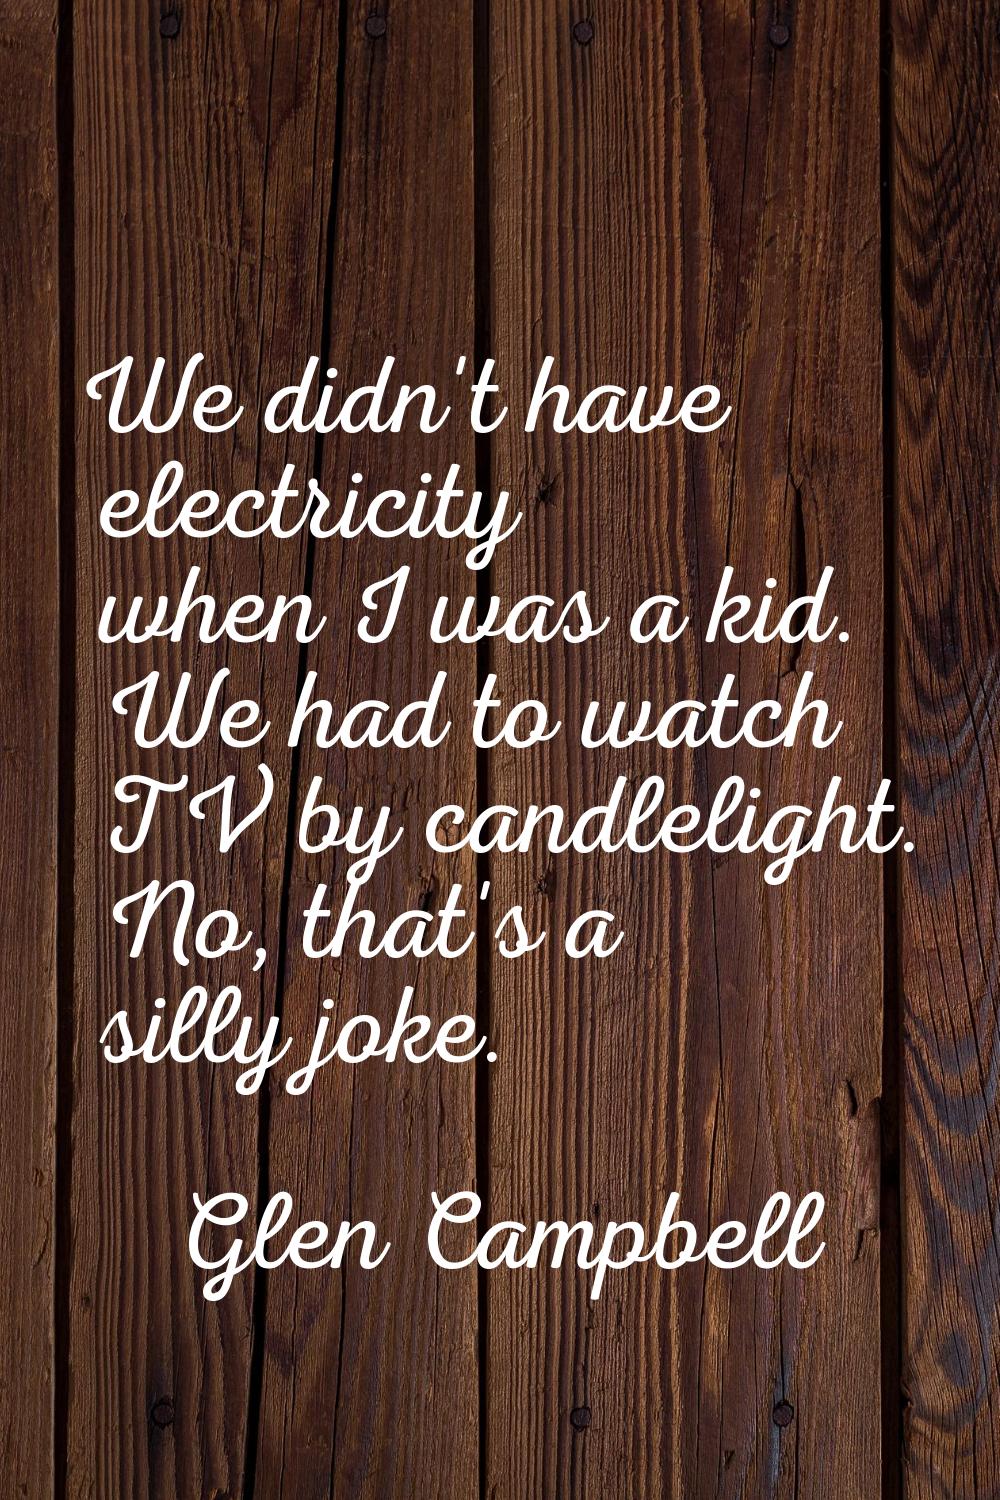 We didn't have electricity when I was a kid. We had to watch TV by candlelight. No, that's a silly 